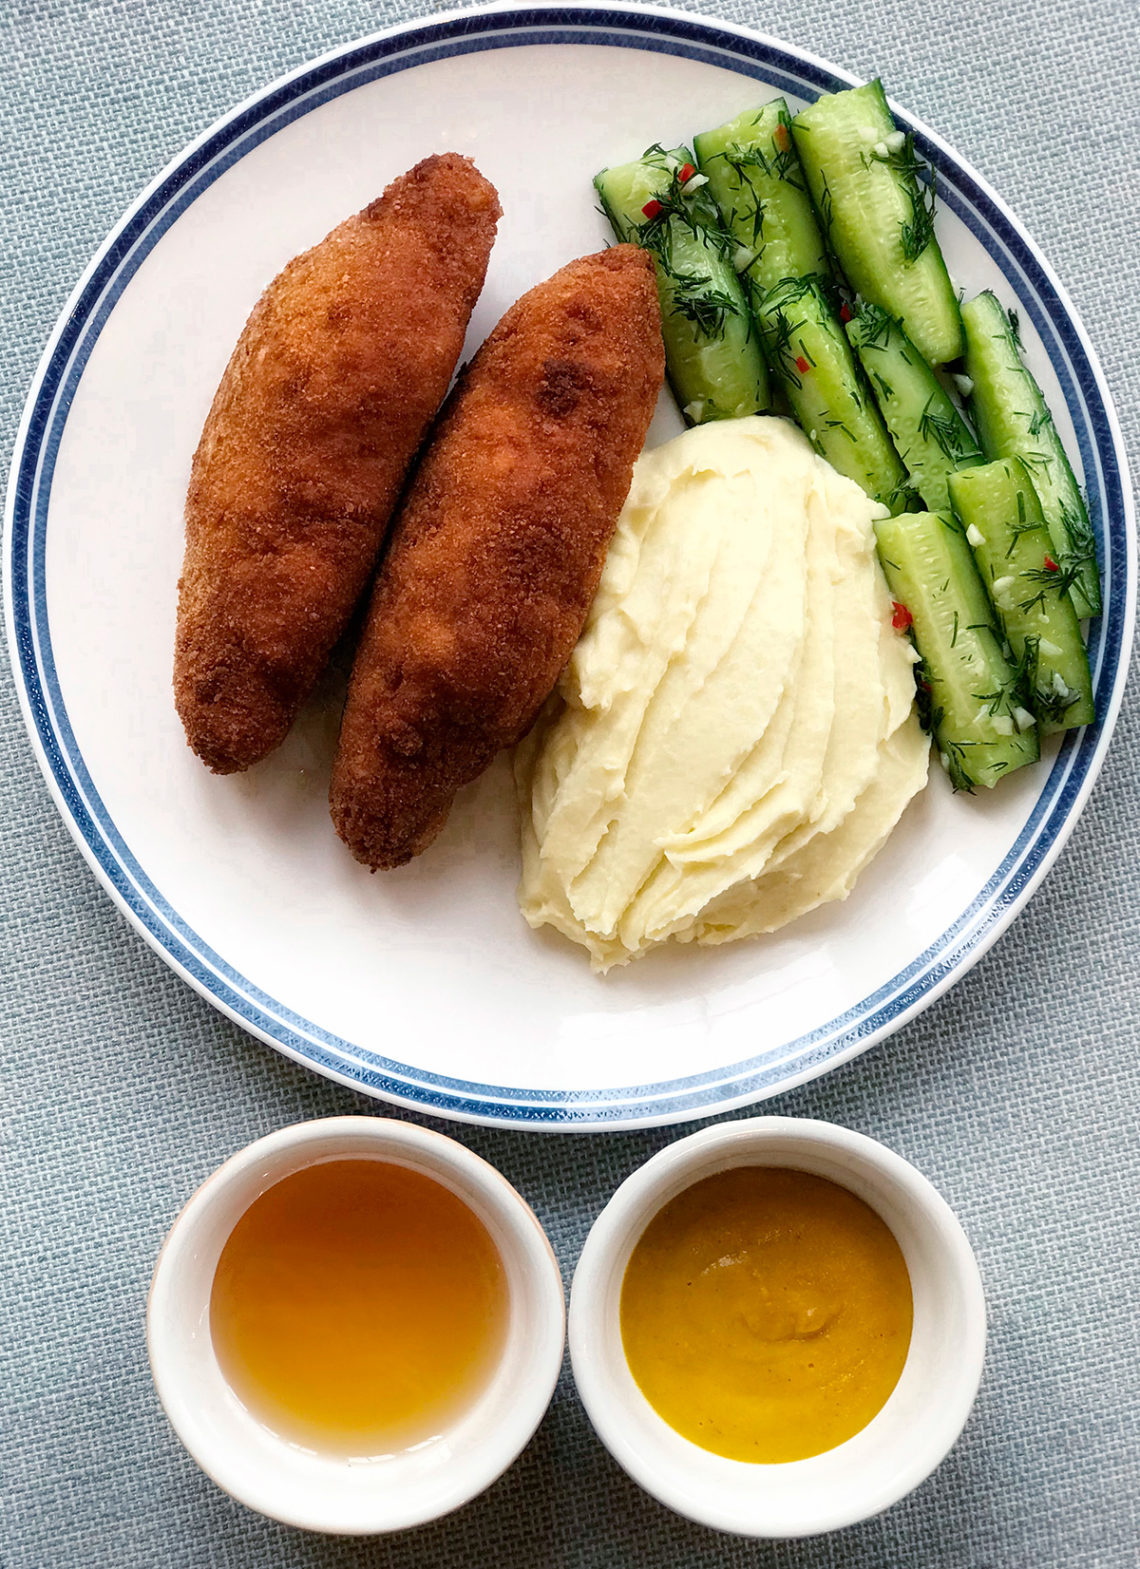 Chicken Kiev. Cooking tips from famous chefs.